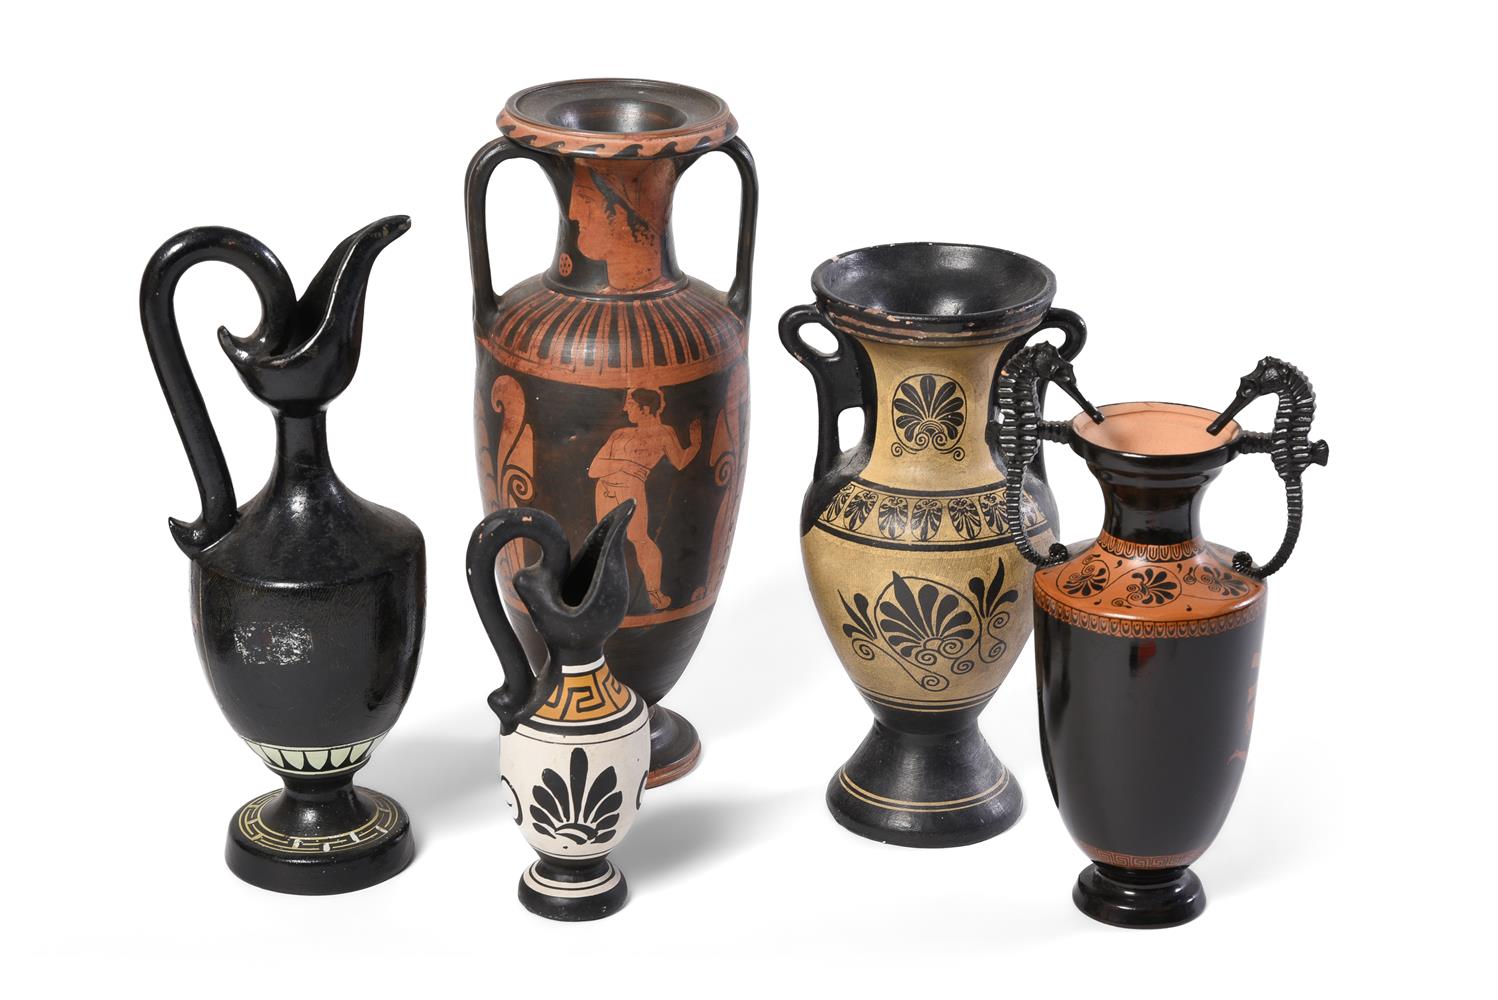 TEN VARIOUS COLD PAINTED TERRACOTTA GREEK STYLE VASES AND JUGS AFTER THE ANTIQUE - Image 4 of 5